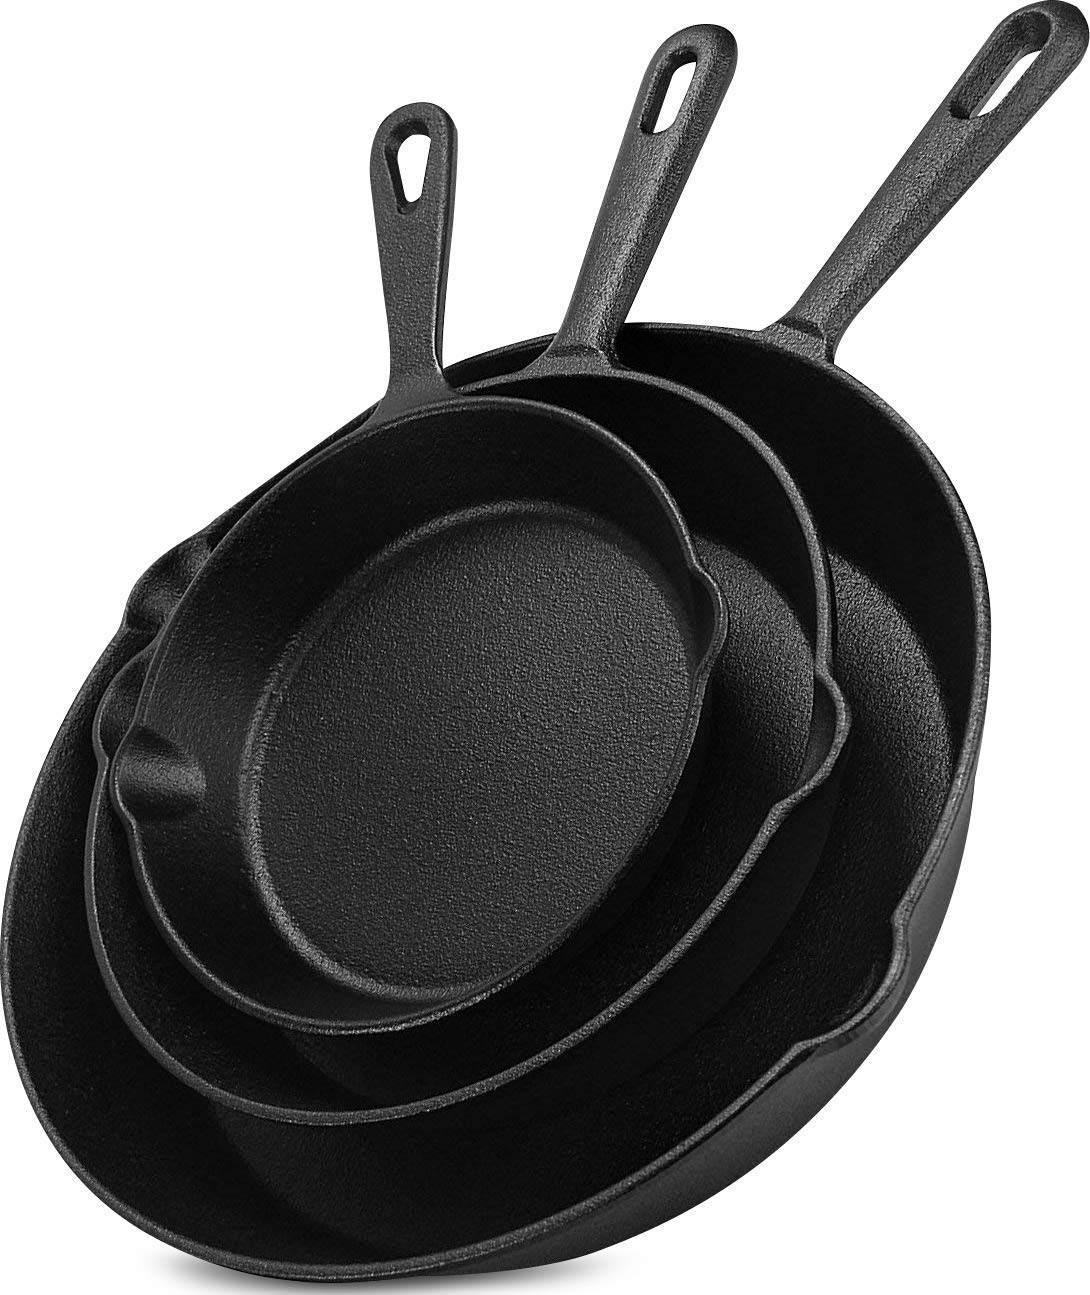 8 Inch and 10 Inch 6 Inch Bulk Pack of 3 KICHLY Pre-Seasoned Cast Iron Skillet Set 3-Piece 